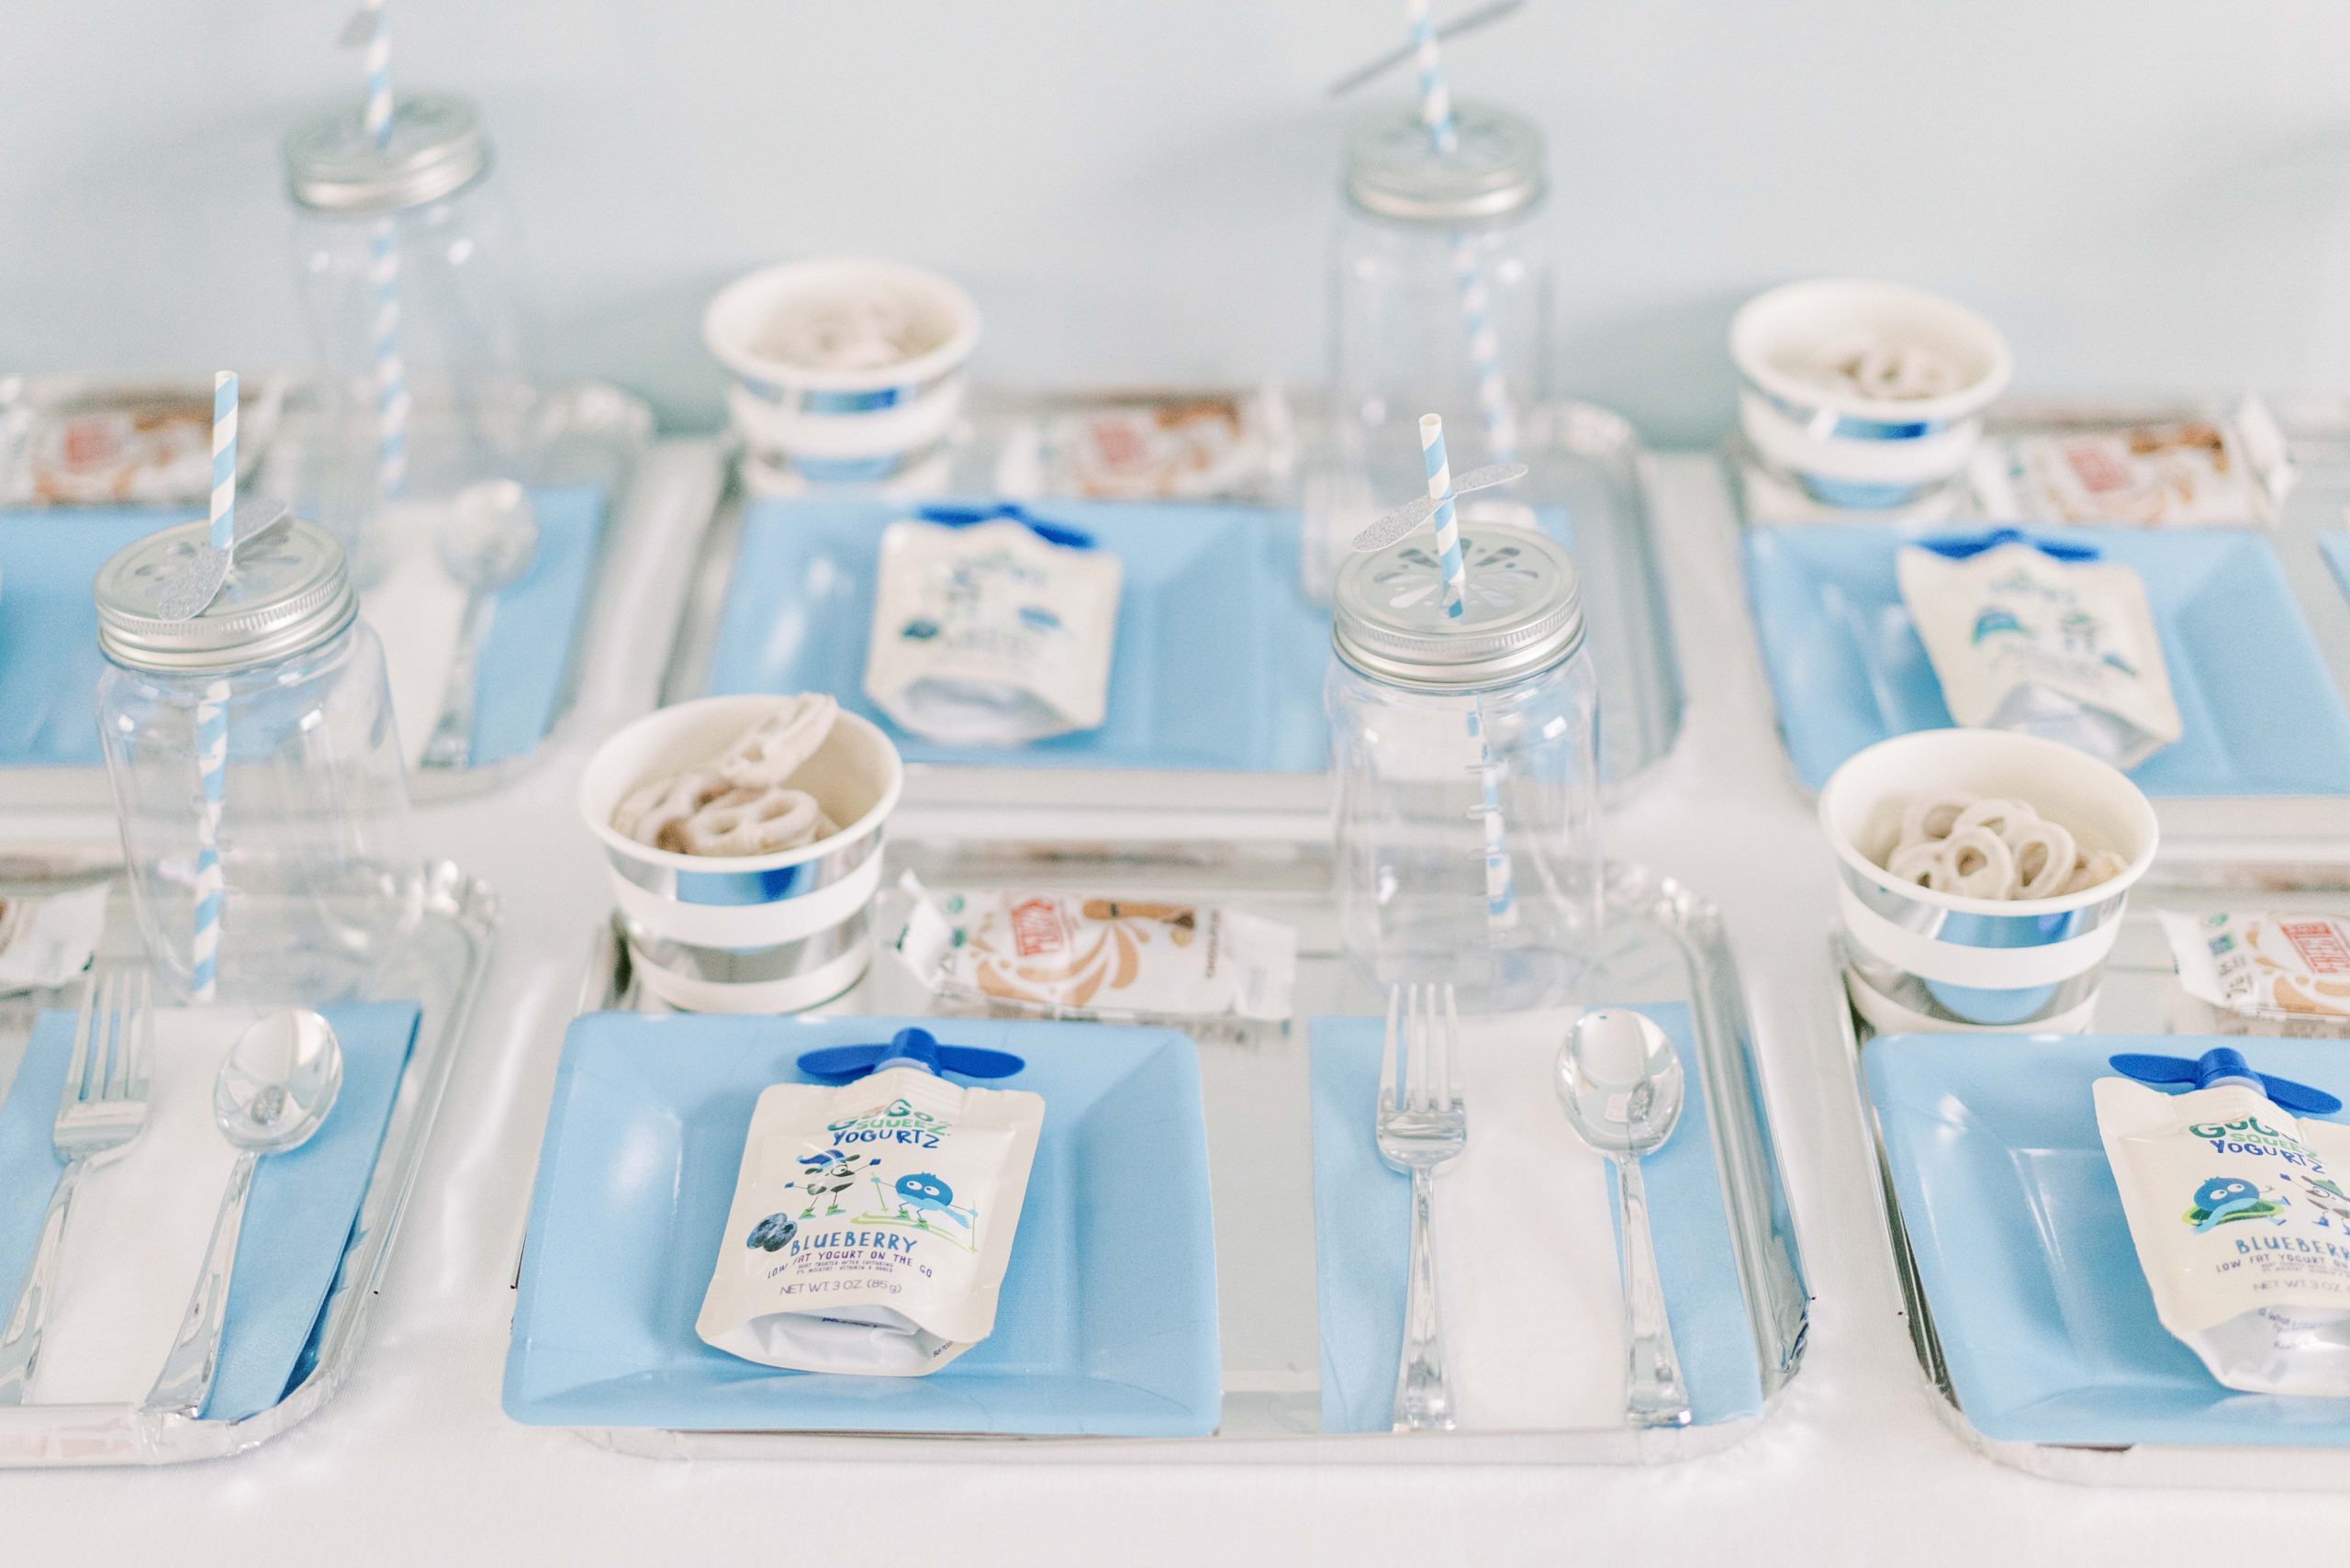 Inflight meal for Kid's Around the World Birthday Party